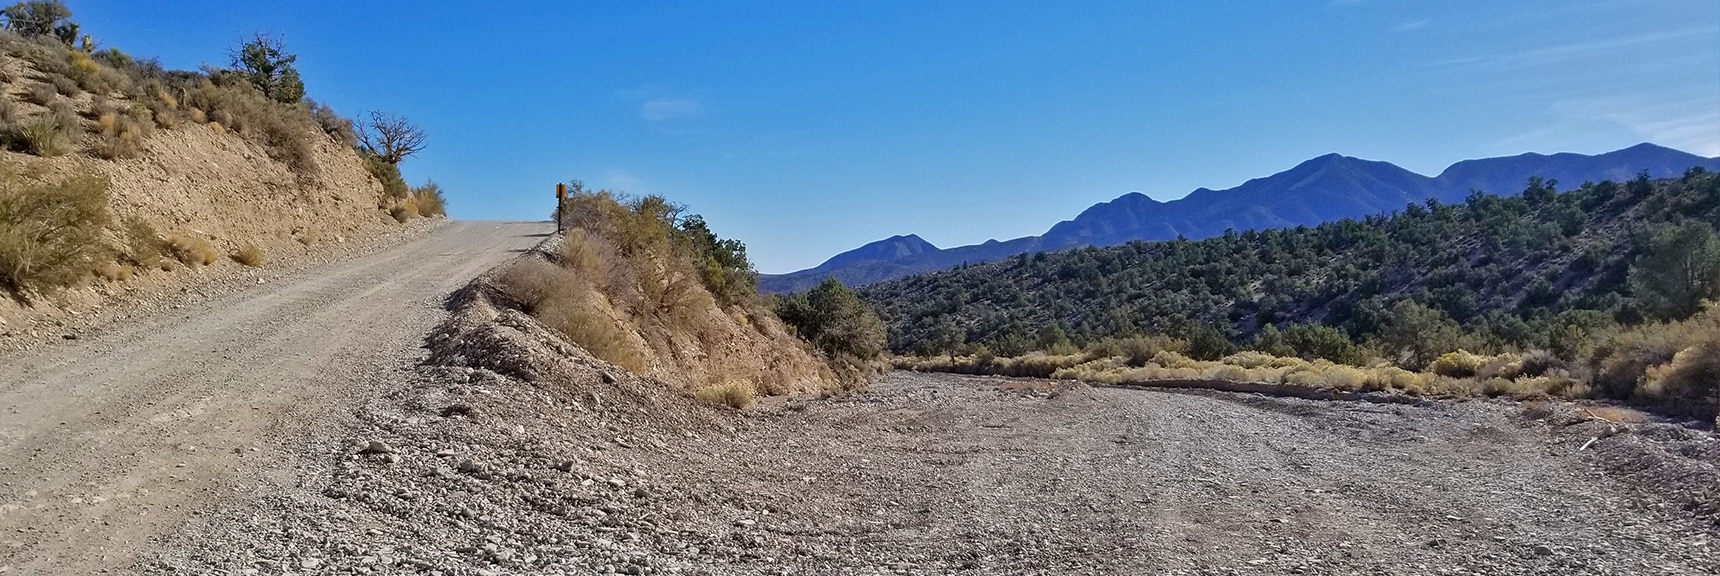 Return Connection with Upper Harris Springs Road (left fork) Toward Kyle Canyon Road | Harris Springs Rd, Harris Mountain Rd | Spring Mountains Wilderness, Nevada